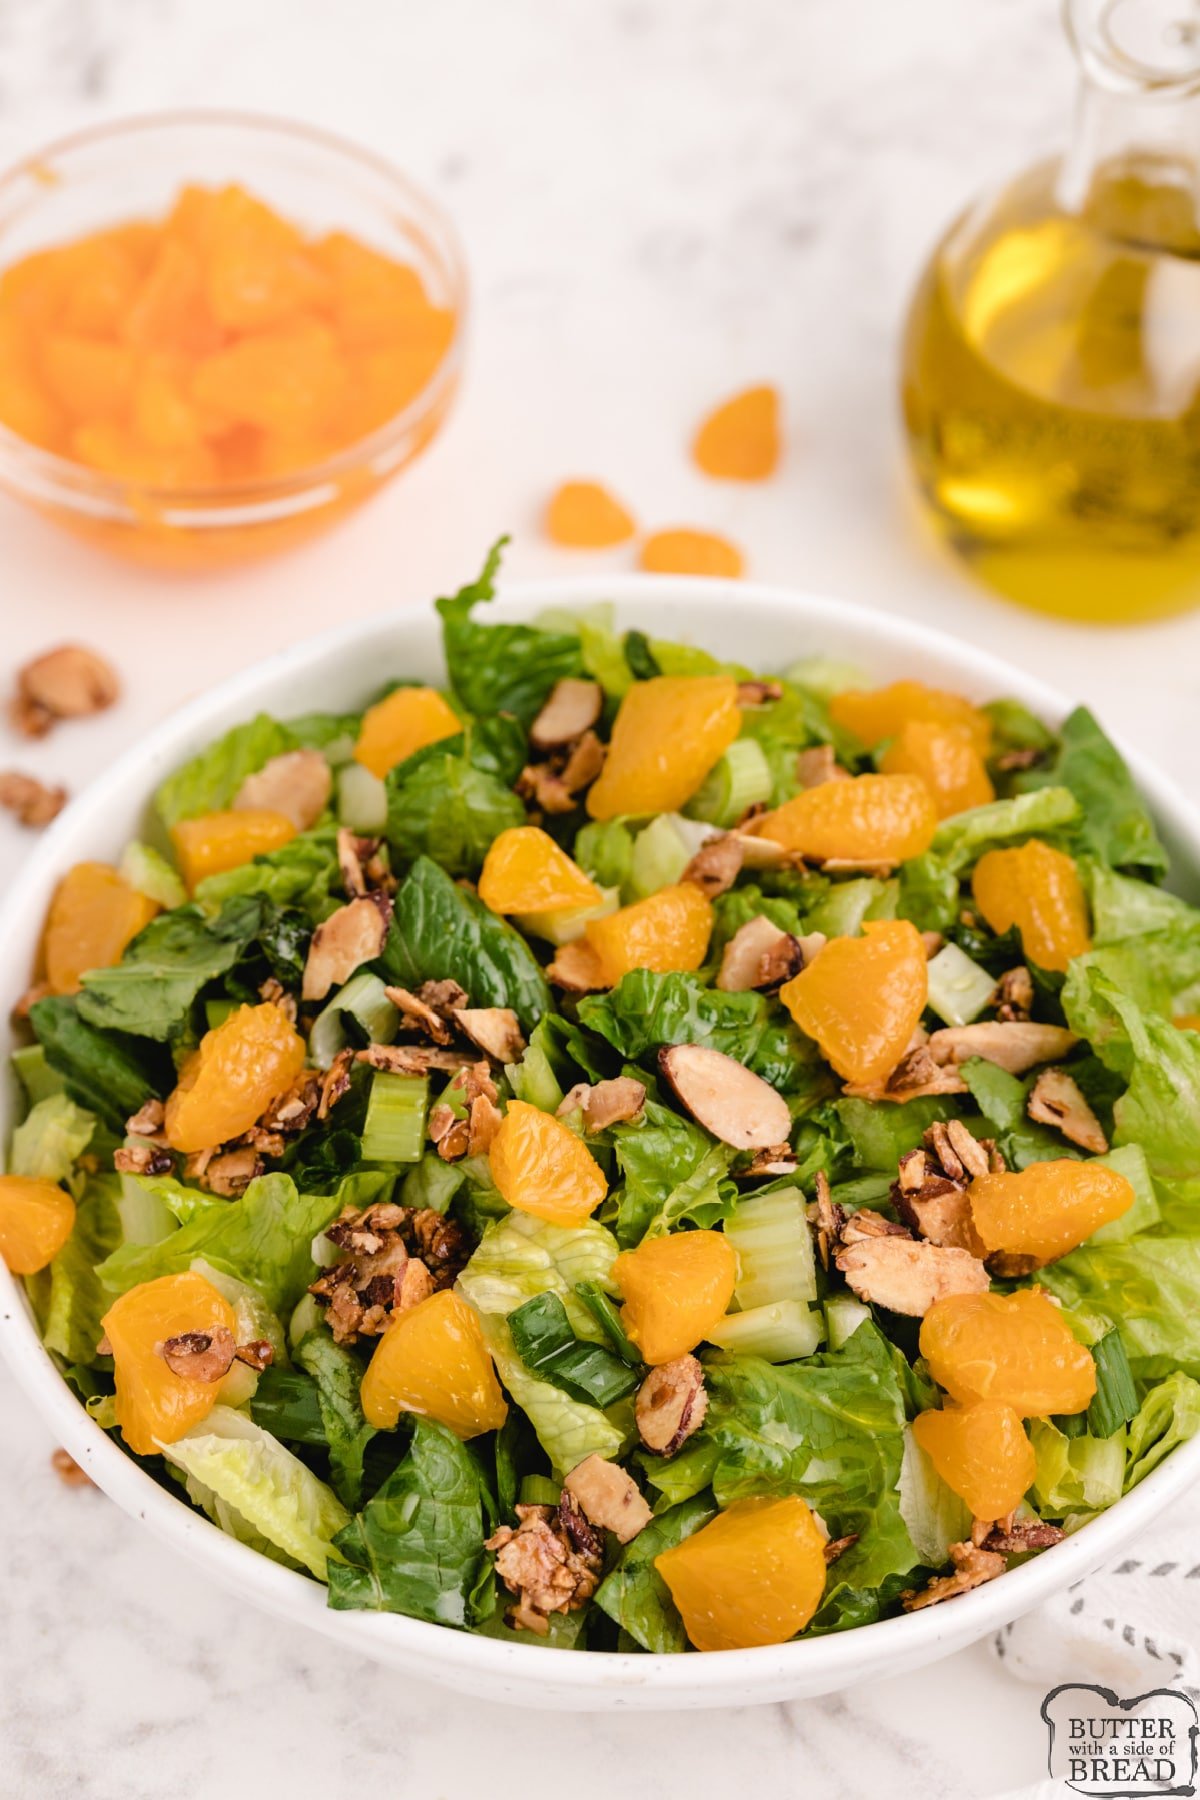 Salad made with mandarin oranges, sliced almonds and simple, sweet homemade dressing